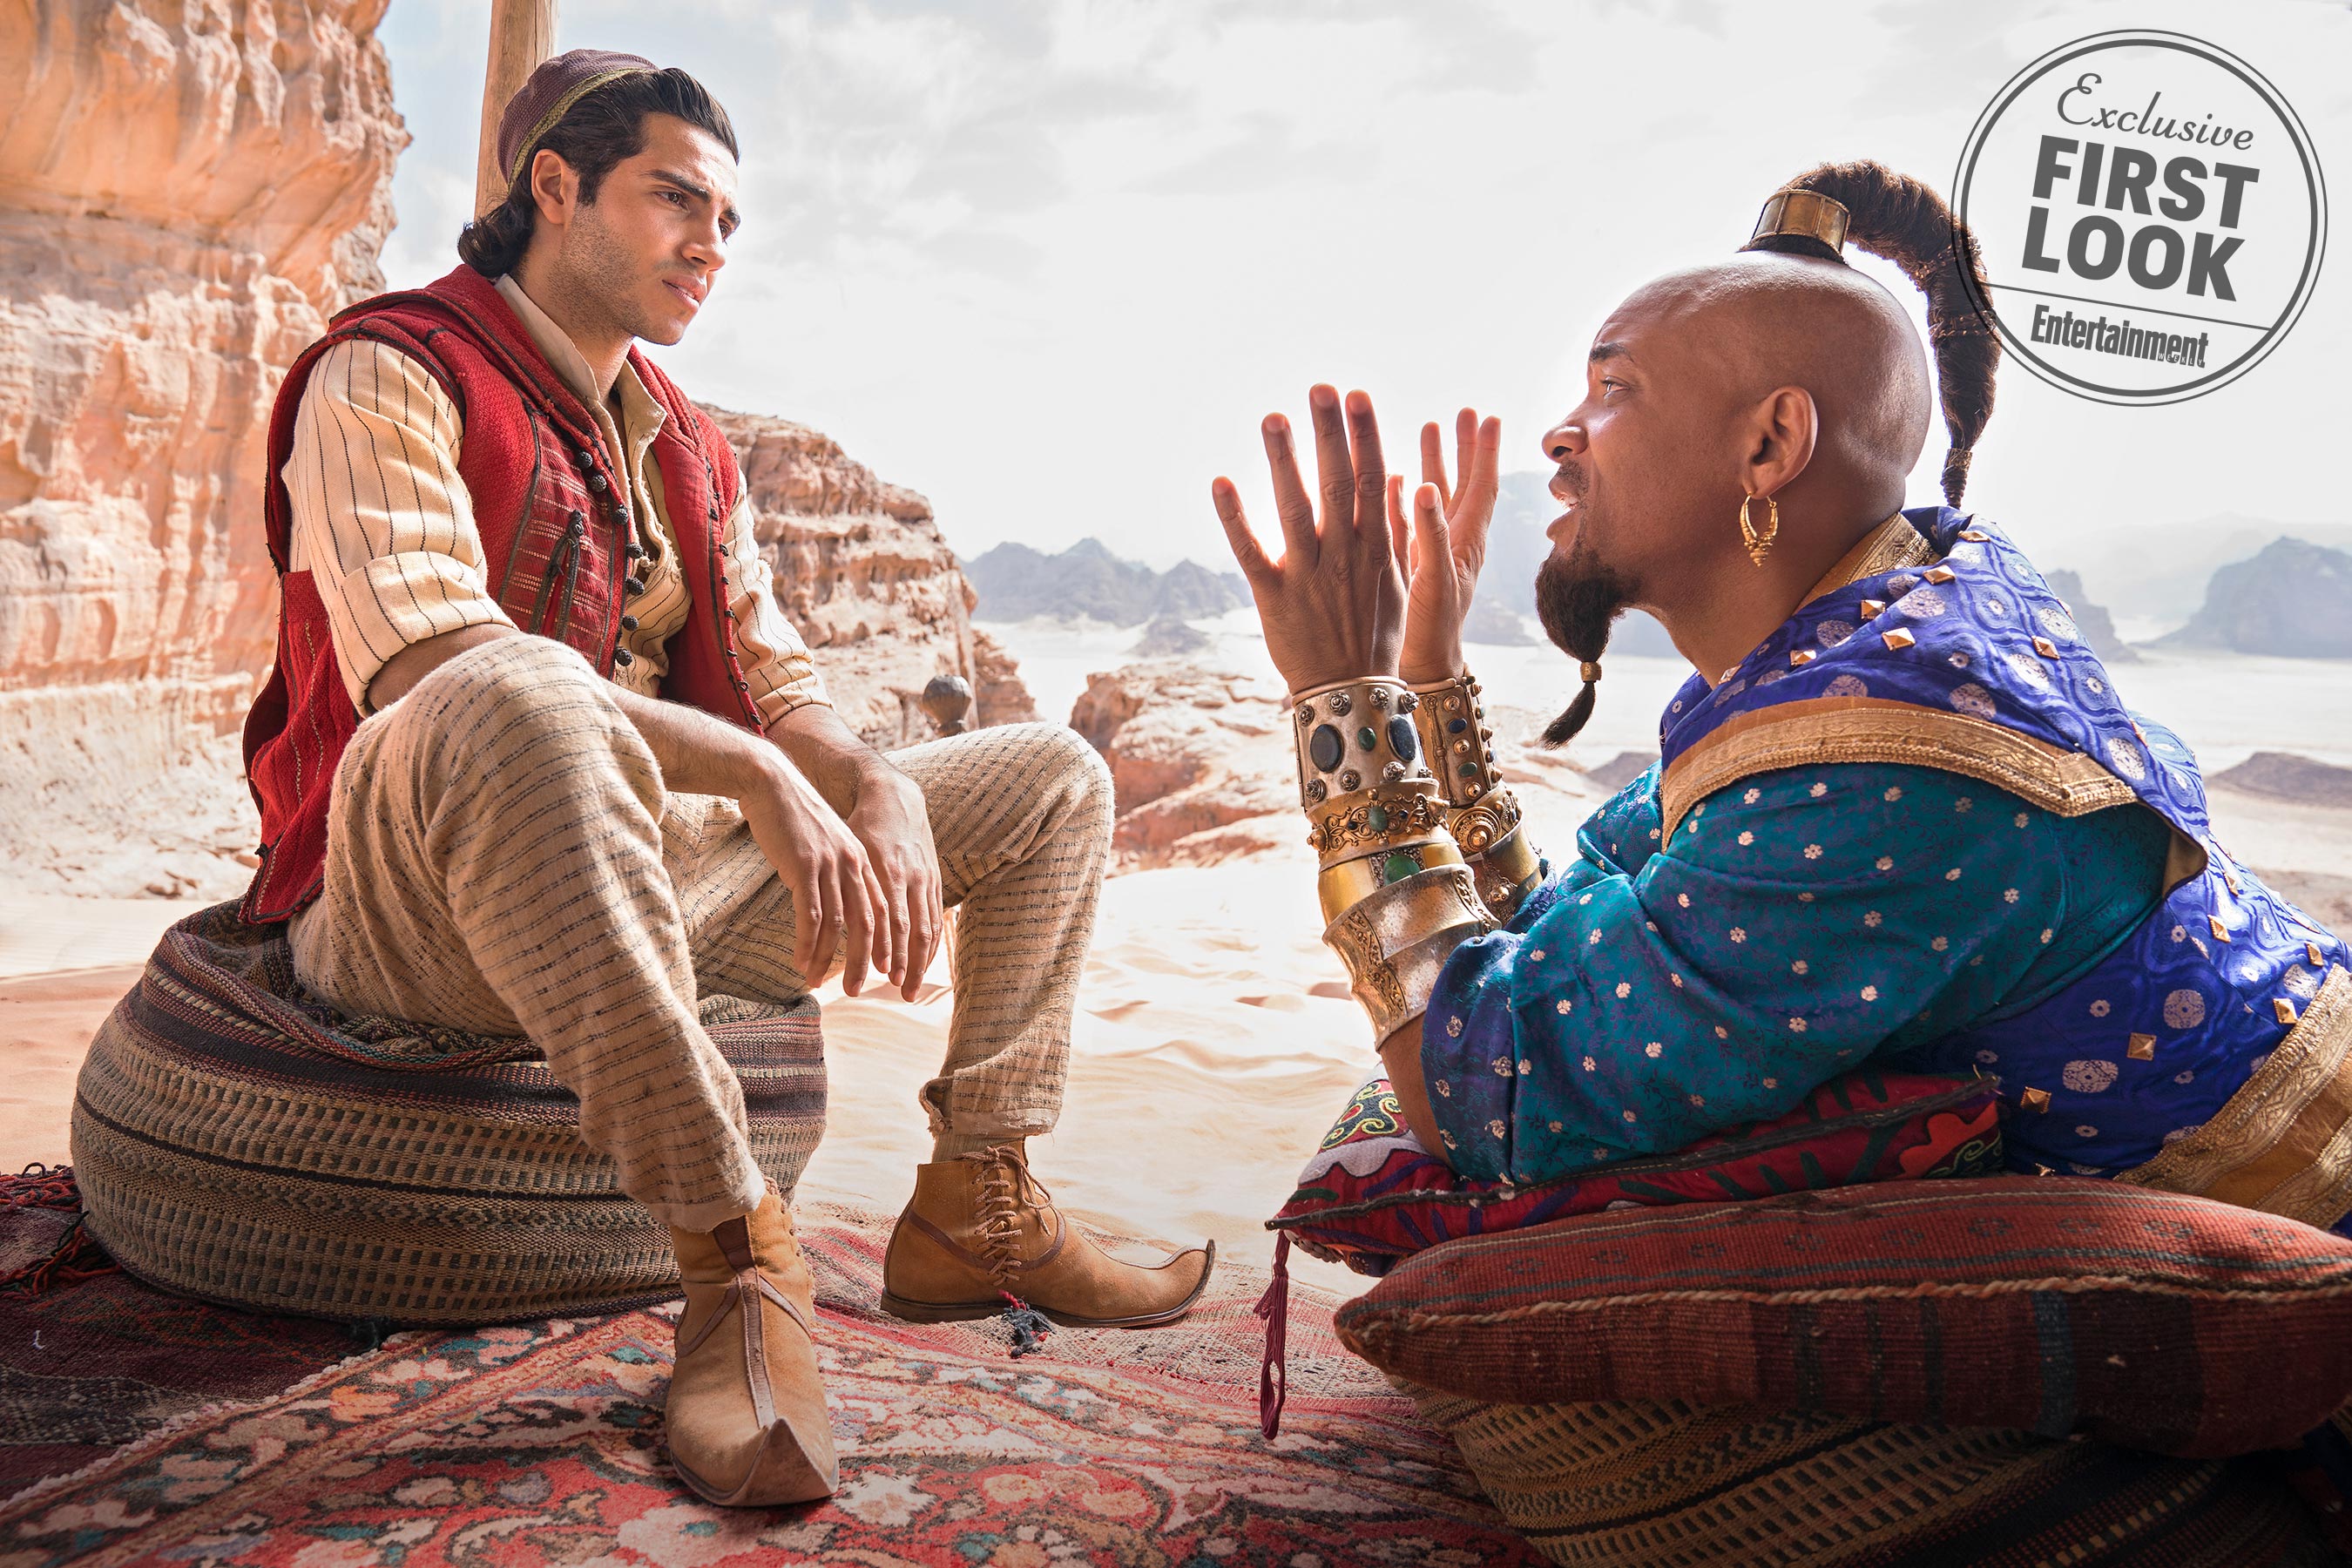 will smith receives backlash over first look of aladdin remake